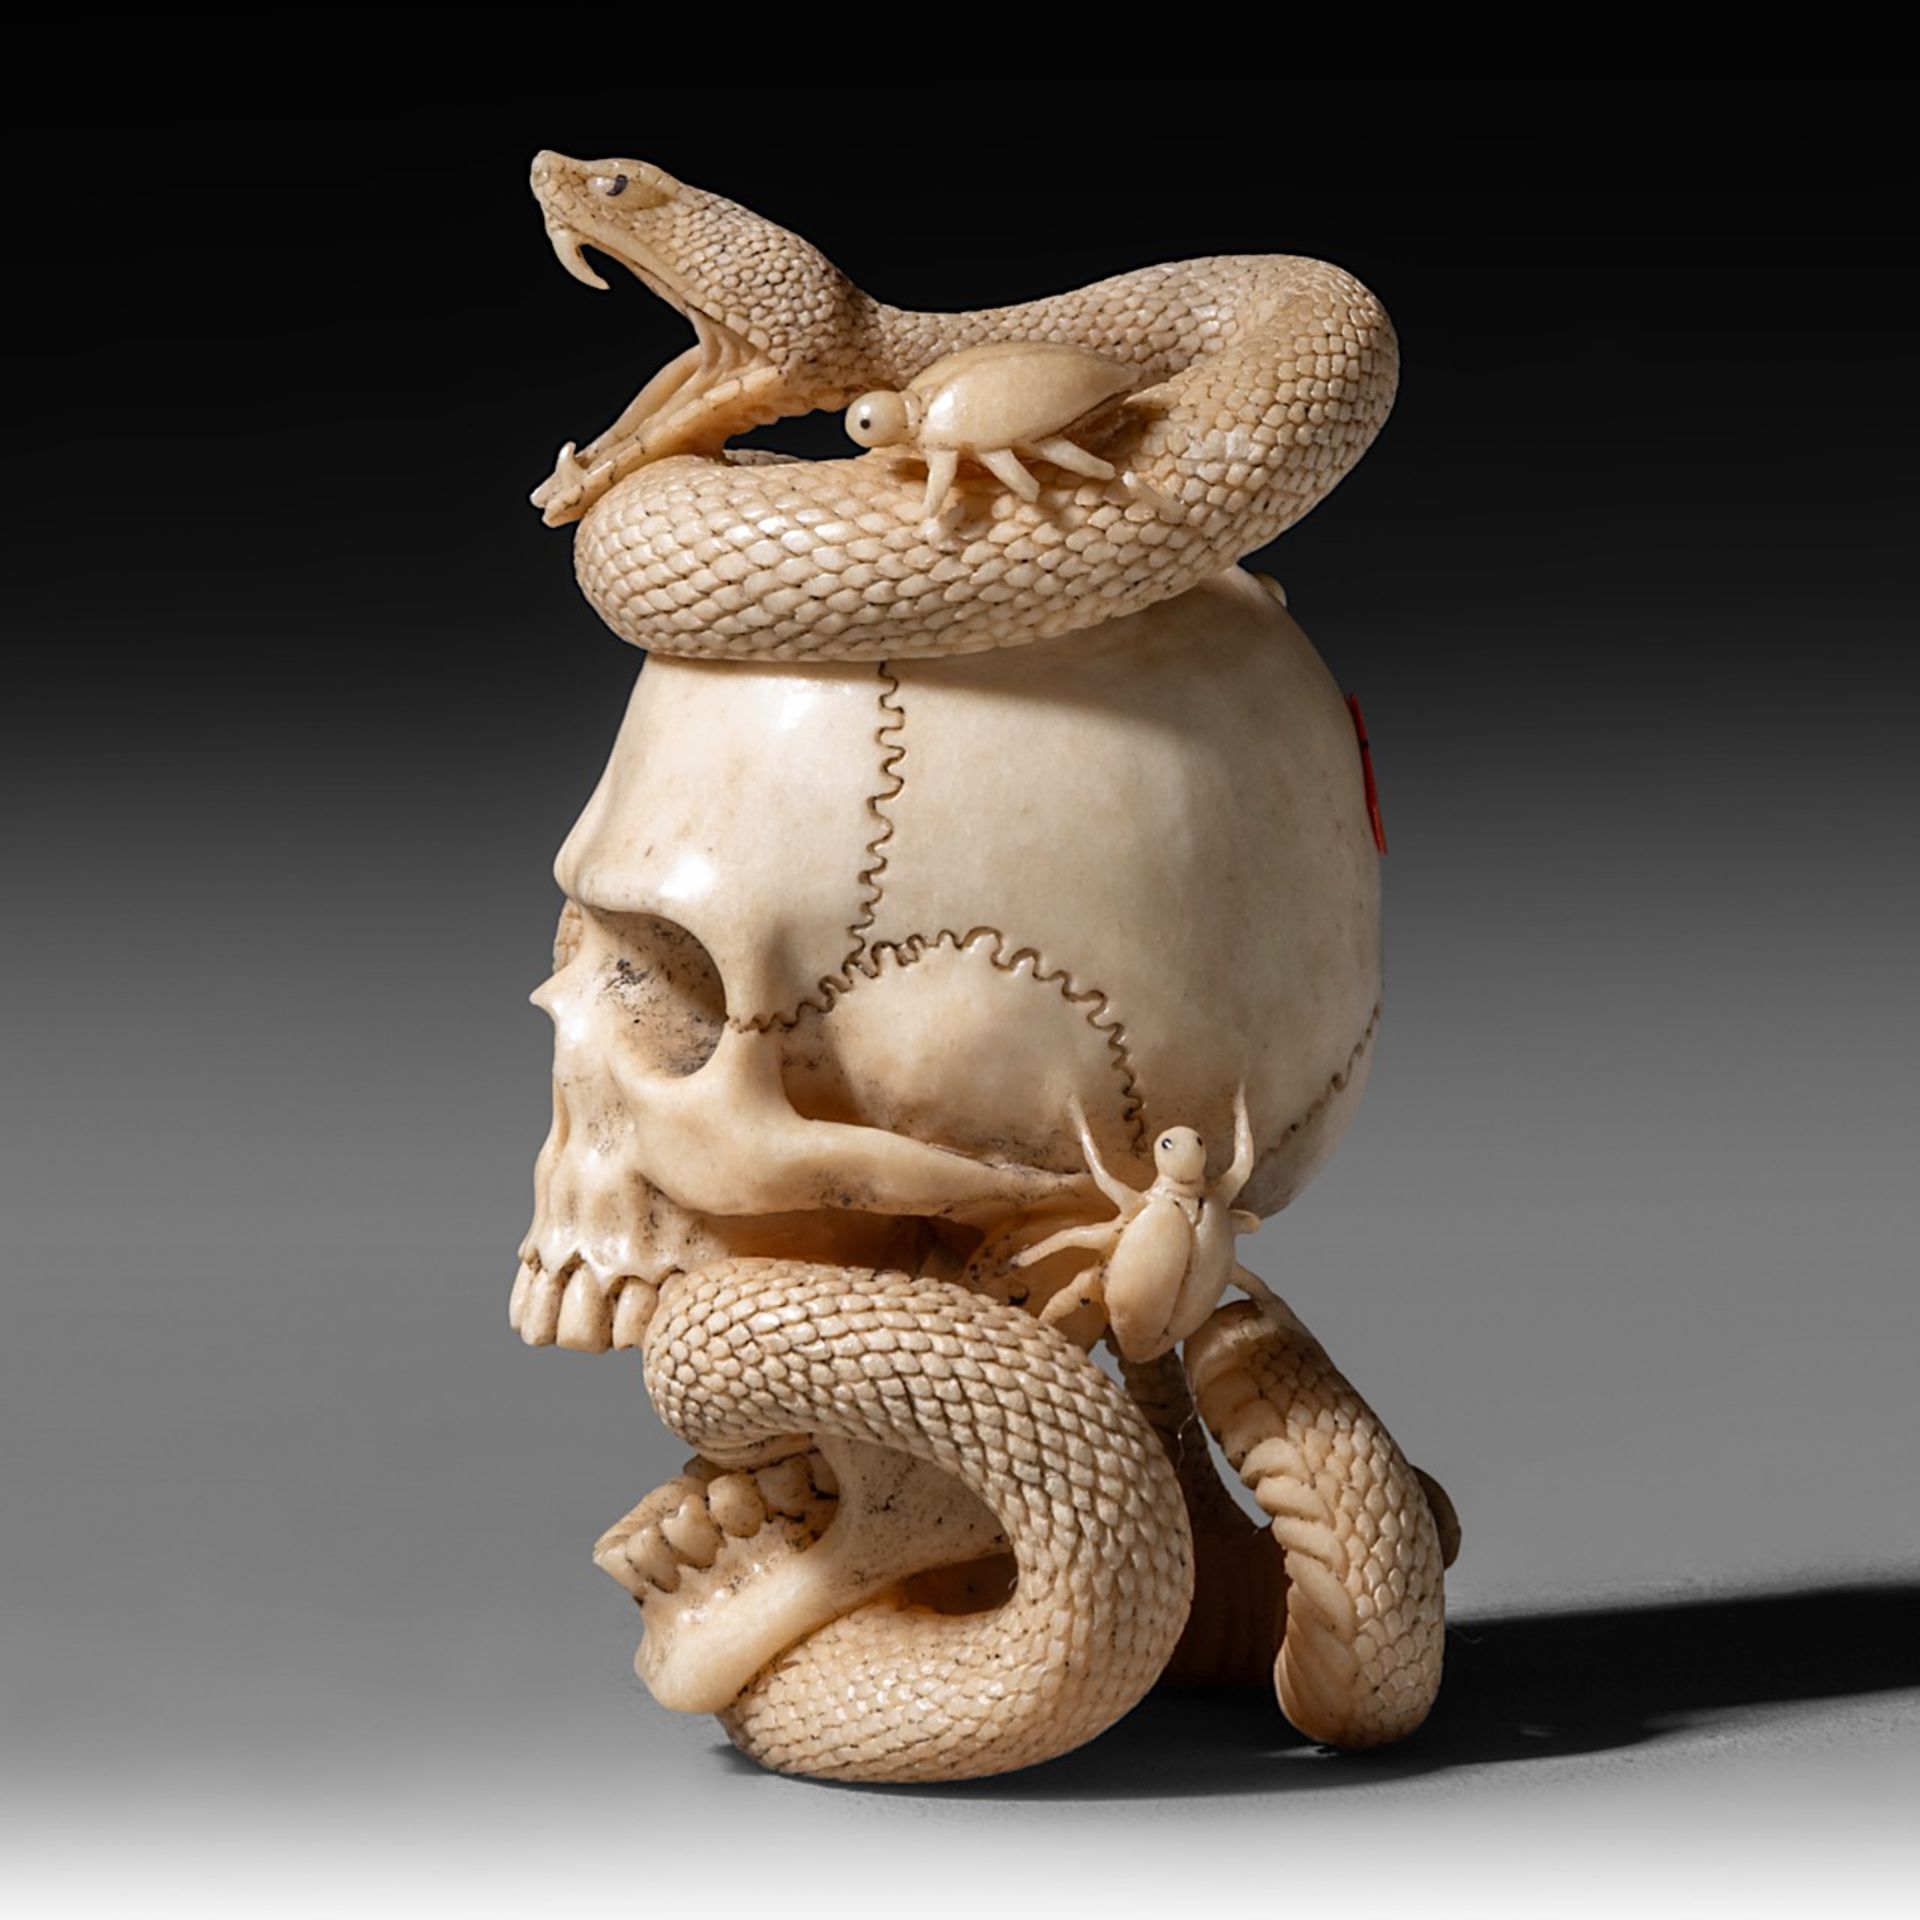 A (German) skull and snake sculpture, bone, 18th - 19th century, H 7,9 cm - weight 79 g - Image 3 of 9